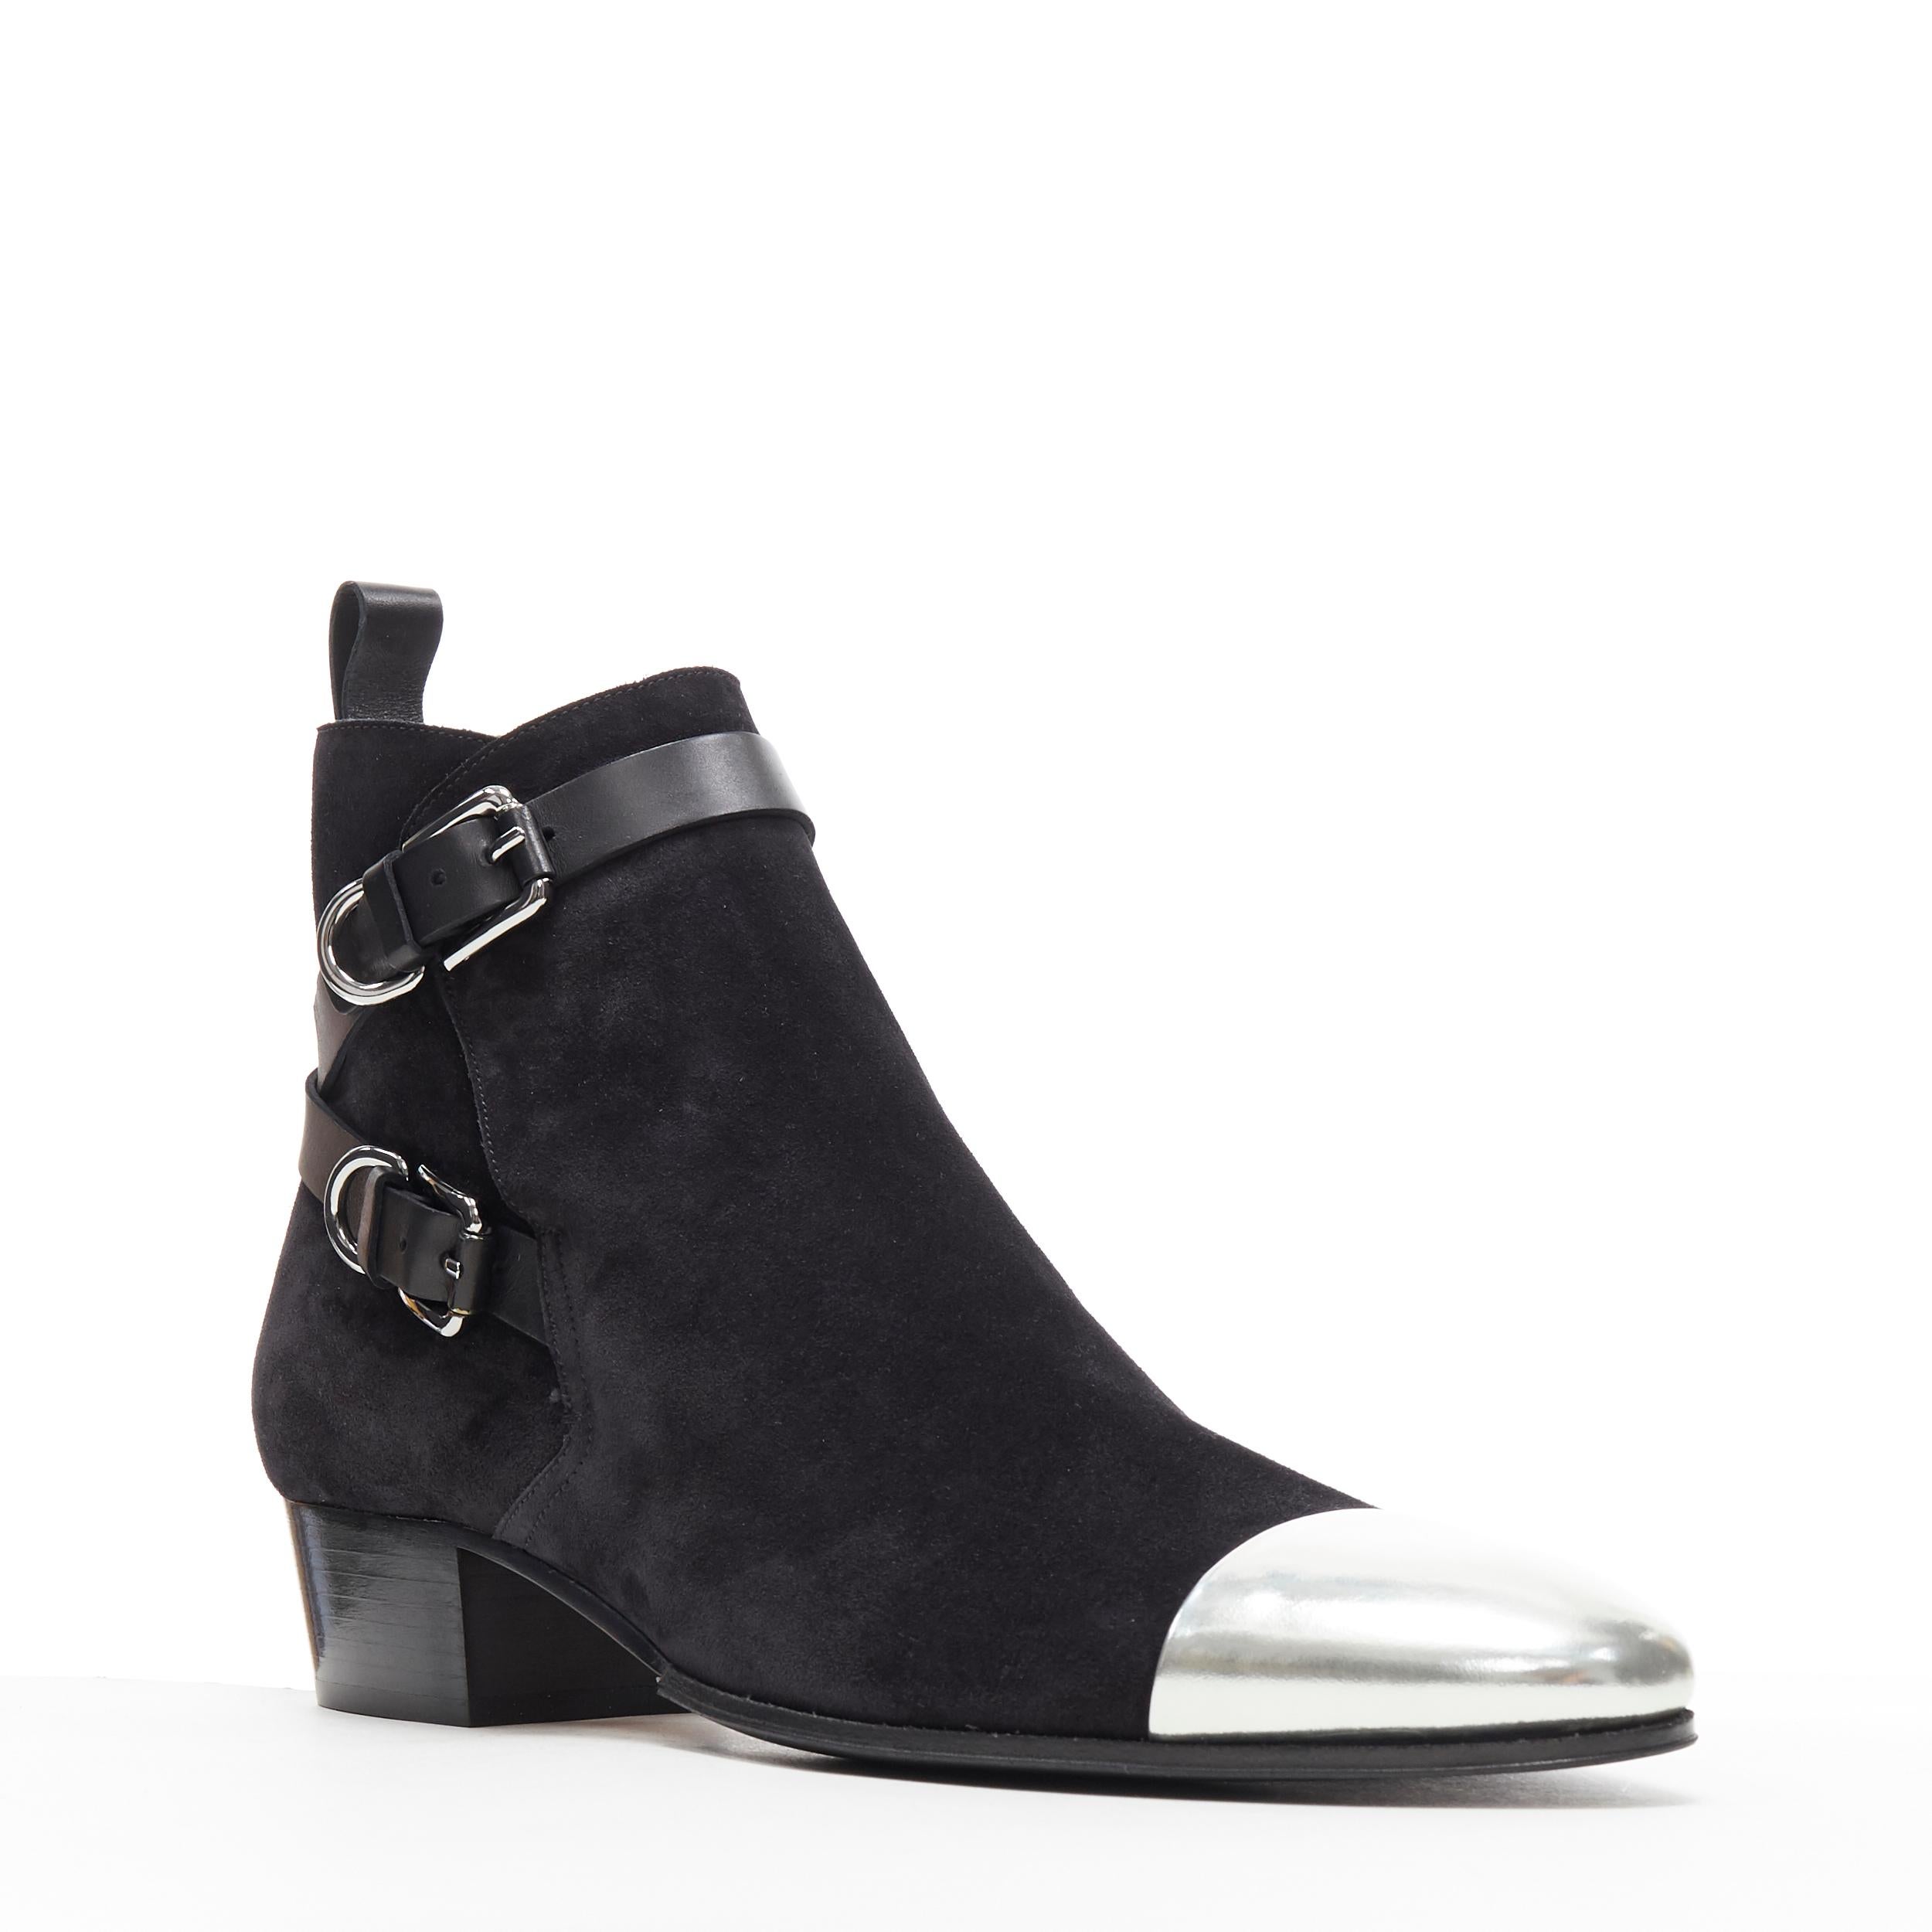 new BALMAIN signature black suede silver toe cap buckle anthos ankle boots EU44
Brand: Balmain
Designer: Olivier Rousteing
Model Name / Style: Suede ankle boot
Material: Suede
Color: Black
Pattern: Solid
Closure: Buckle
Extra Detail: Black genuine